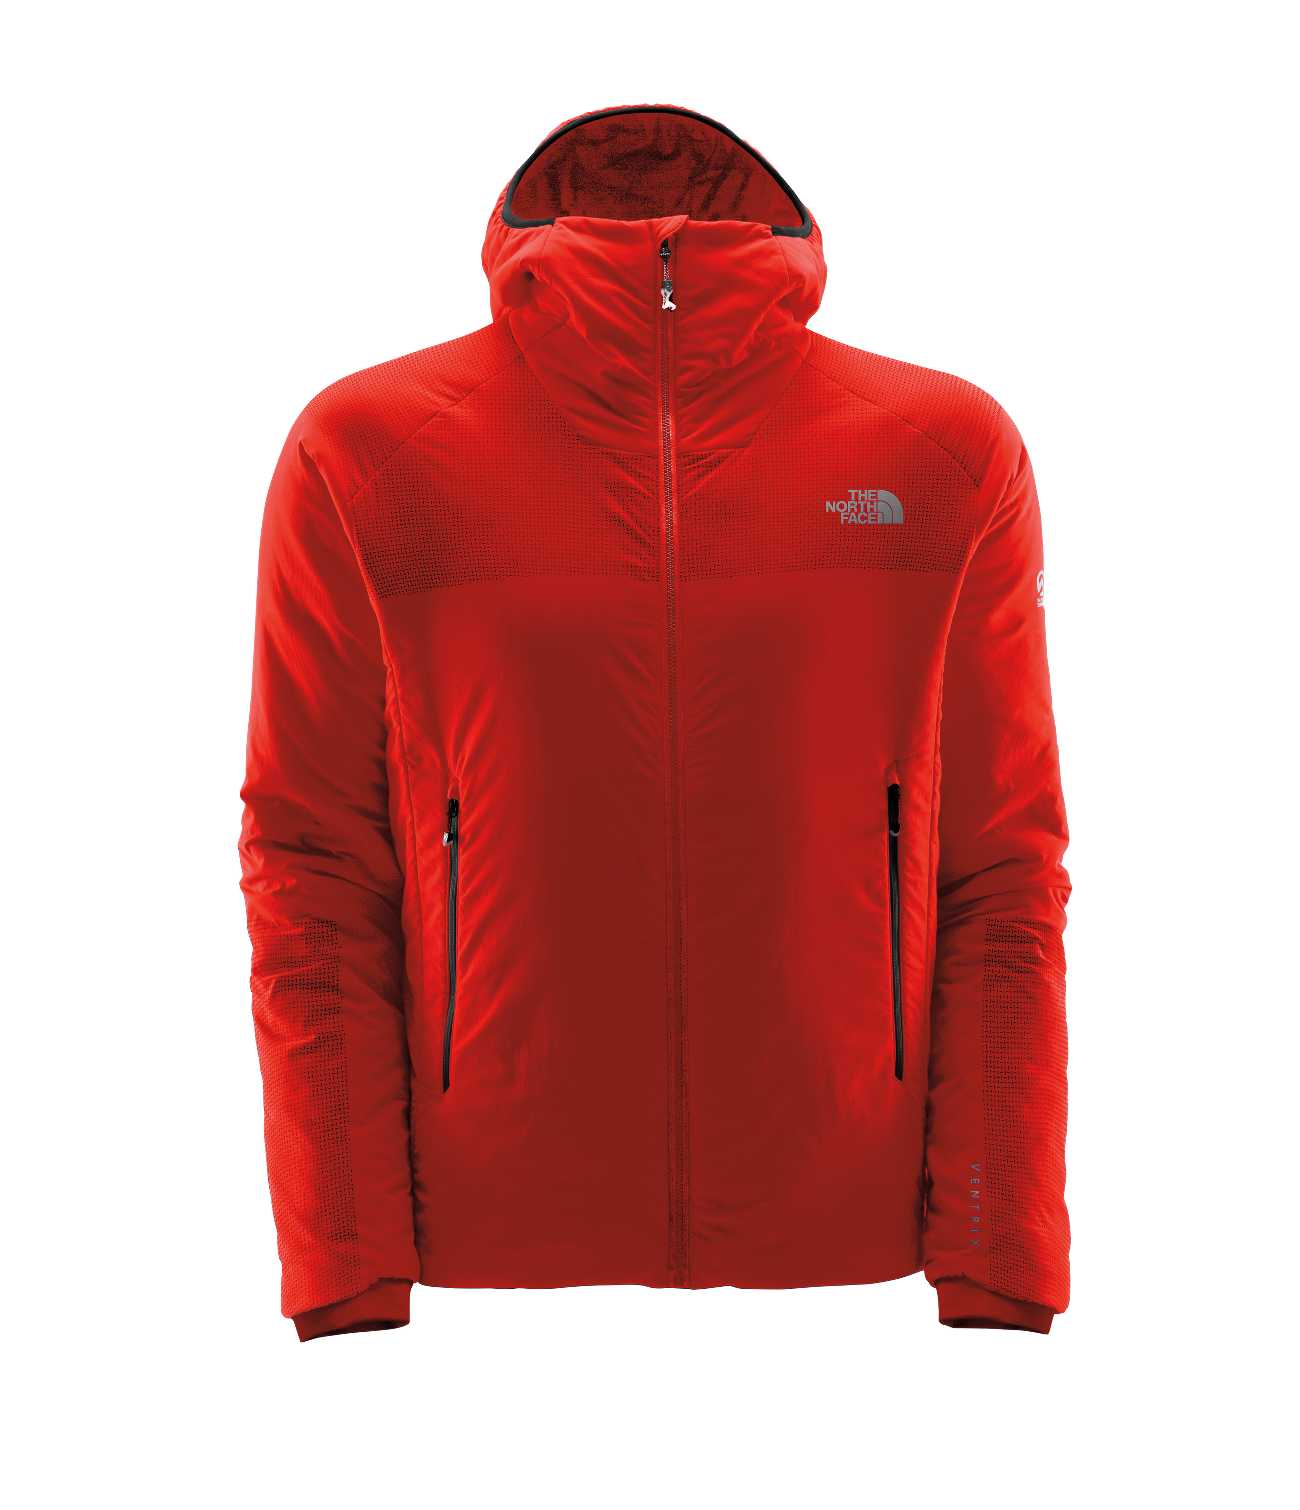 The North Face Renewed By RÆBURN Just Dropped at Zalando